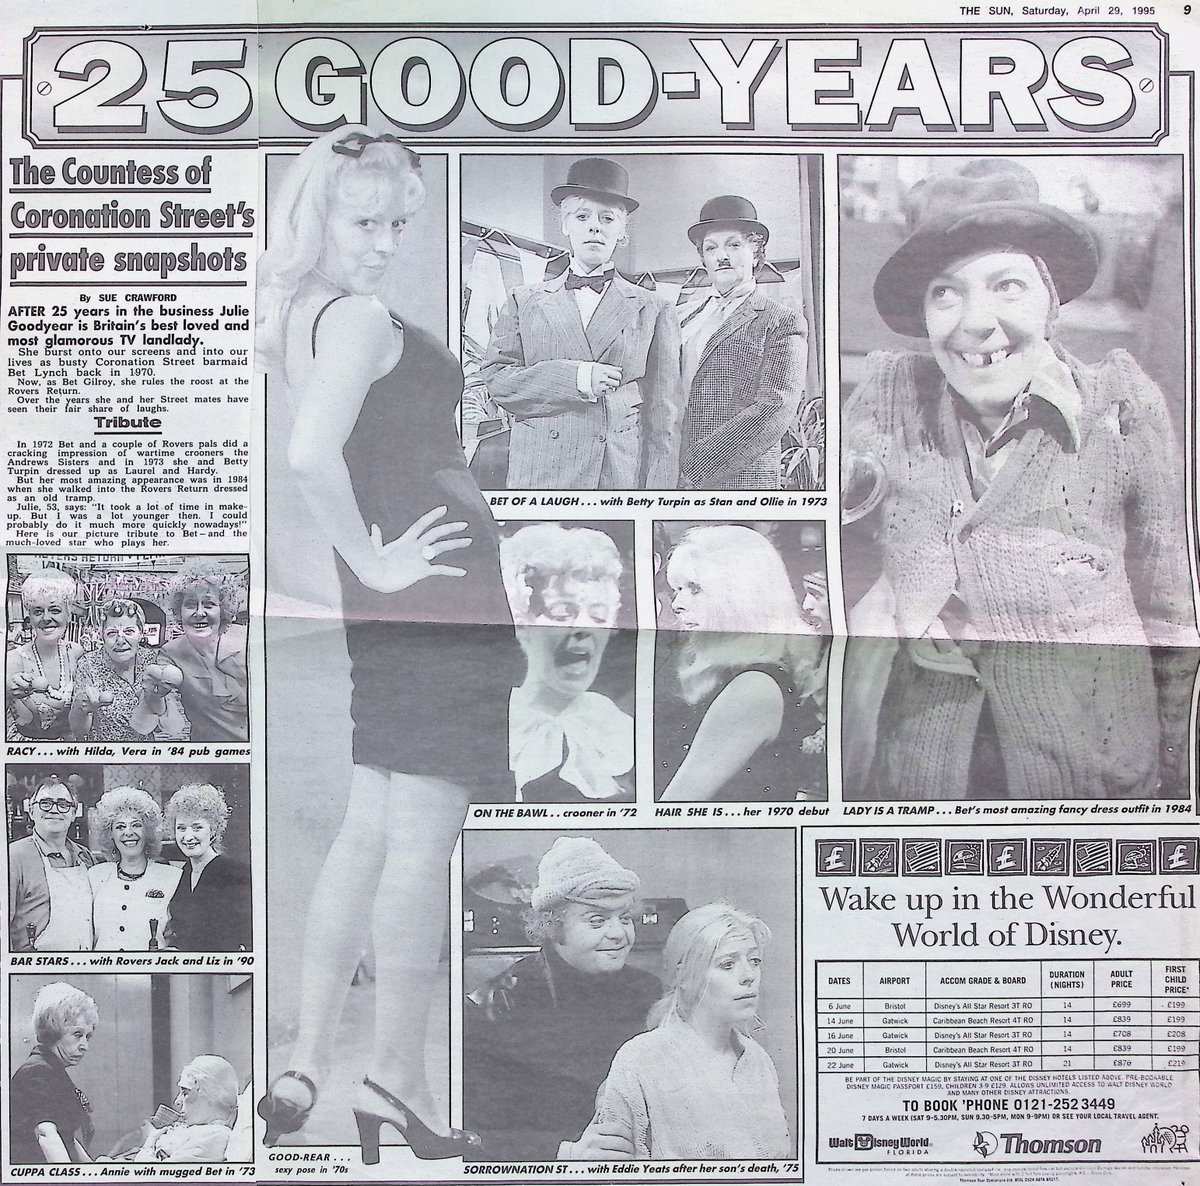 #OnThisDay 29 April 1995 25 GOOD-YEARS - The Countess of Coronation Street's private snapshots 'After 25 years in the business Julie Goodyear is Britain's best loved and most glamorous TV landlady ...' #ClassicCoronationStreet